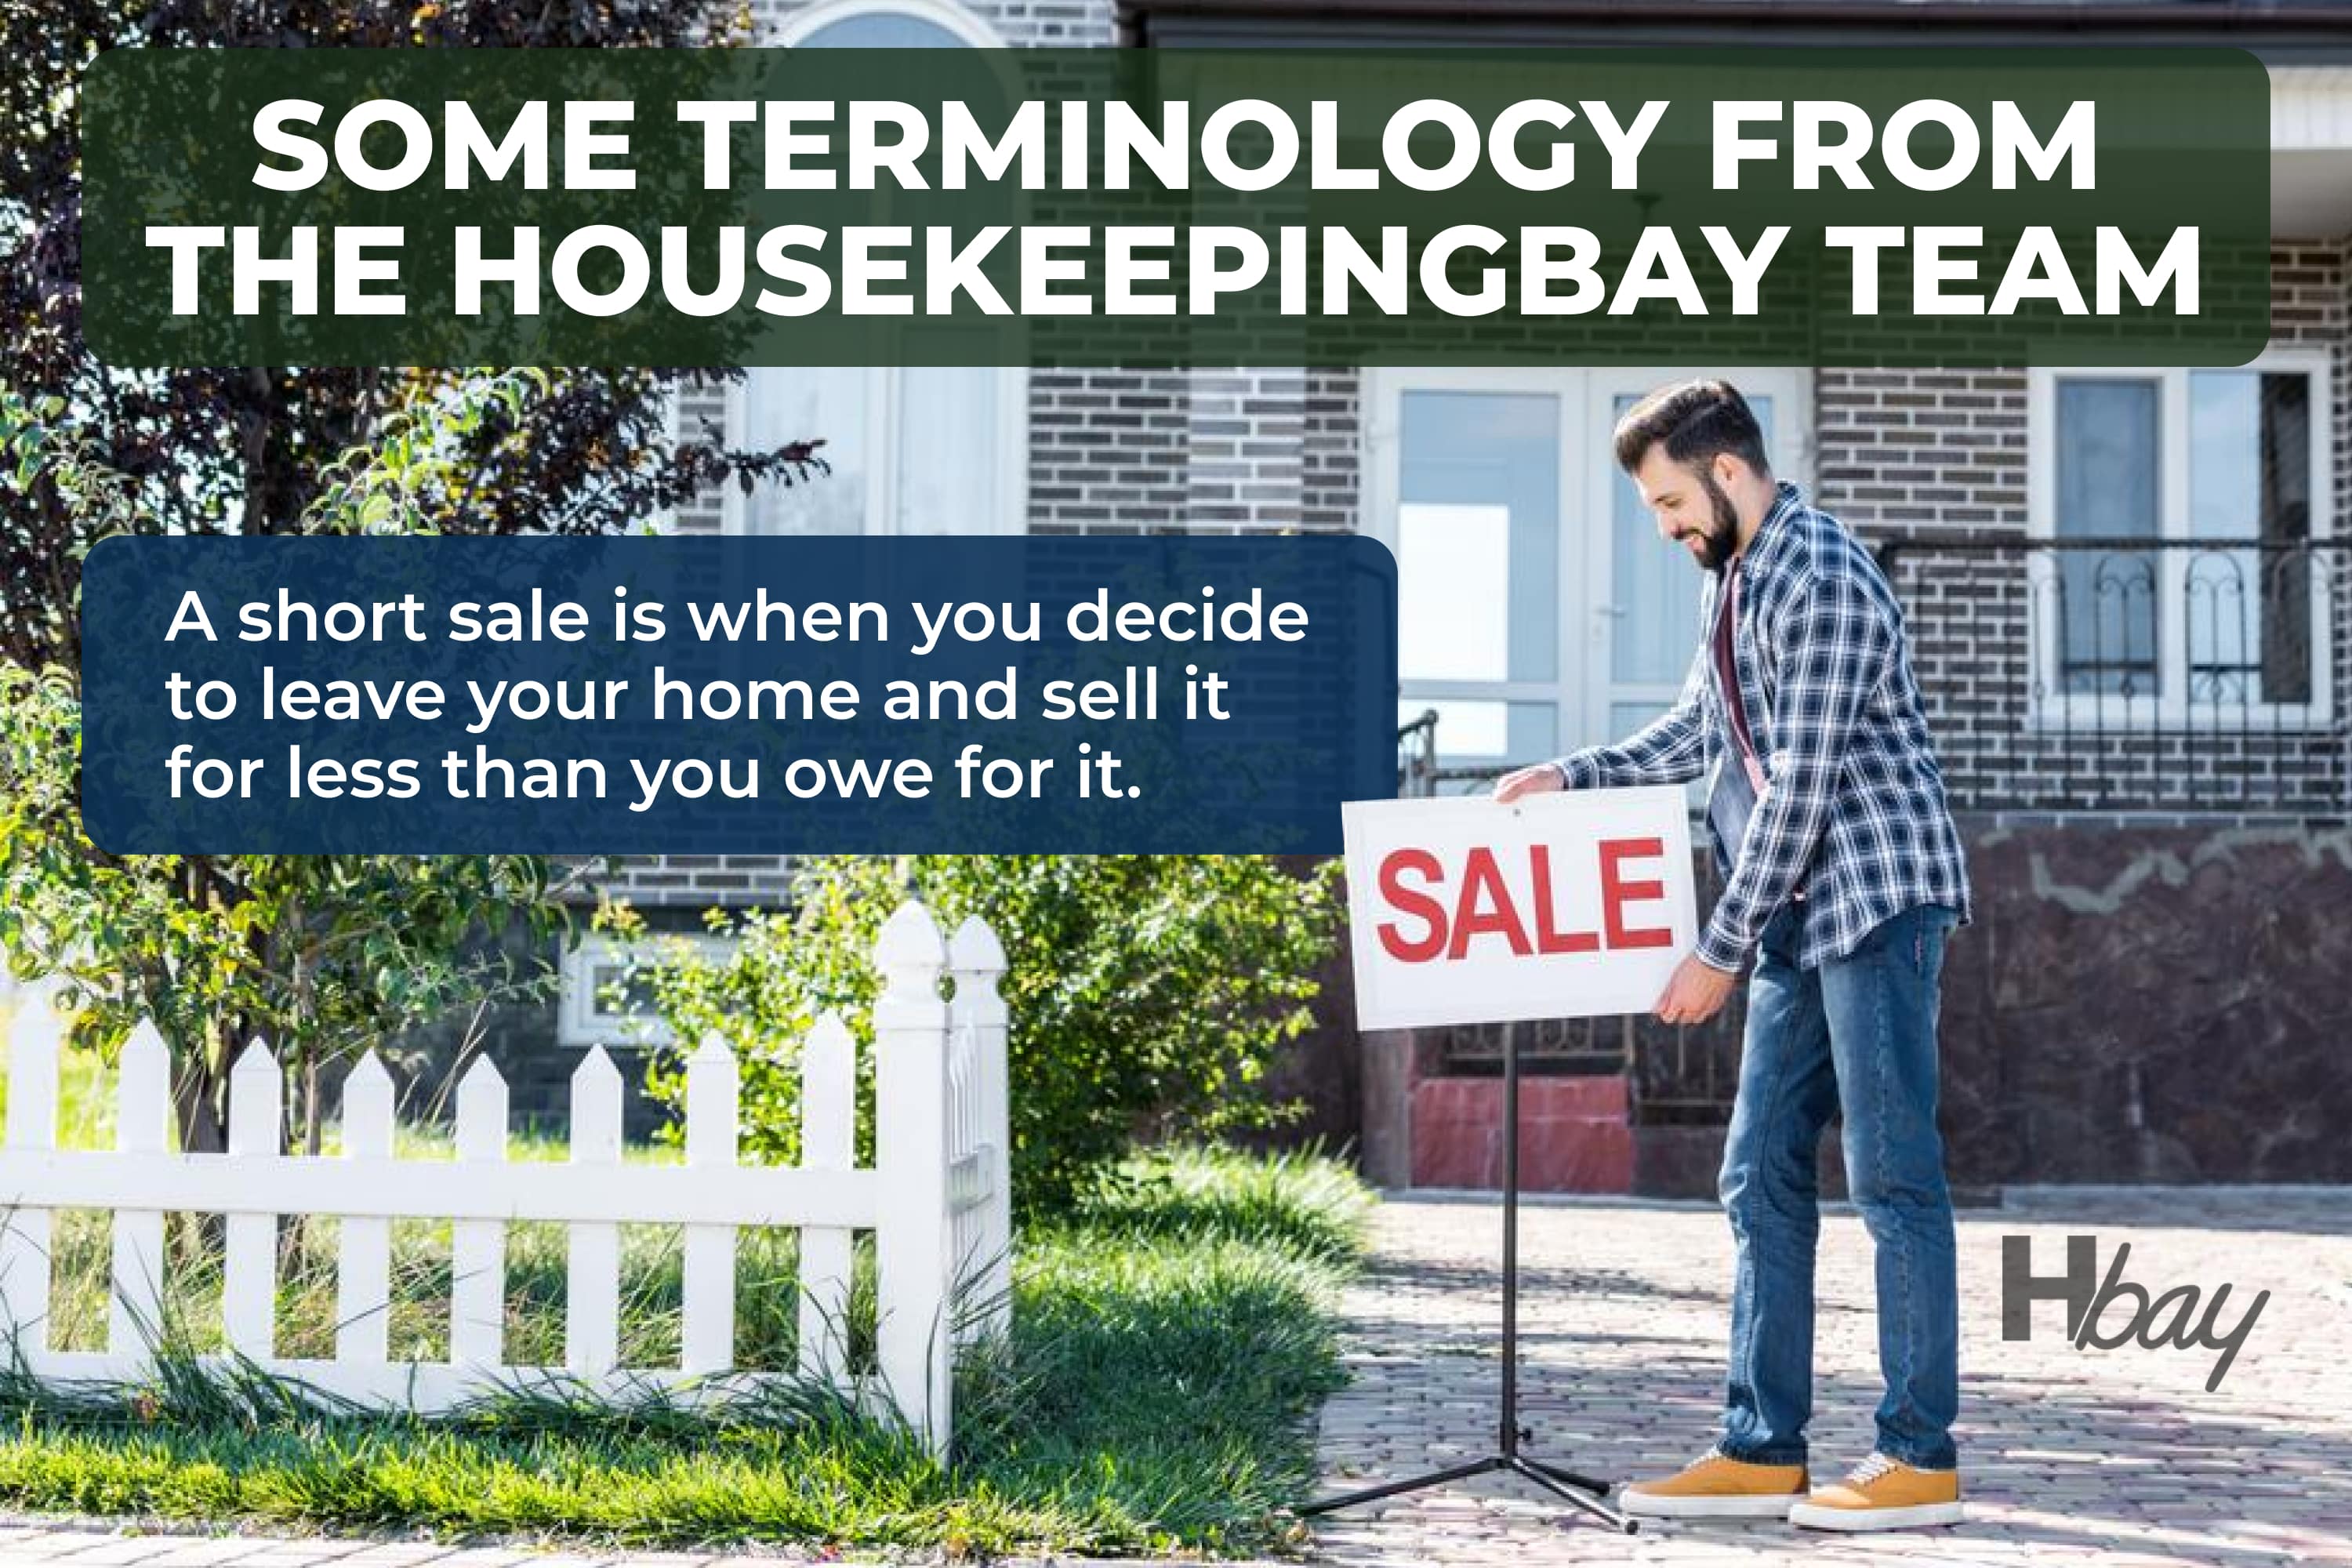 Some terminology from the Housekeepingbay team